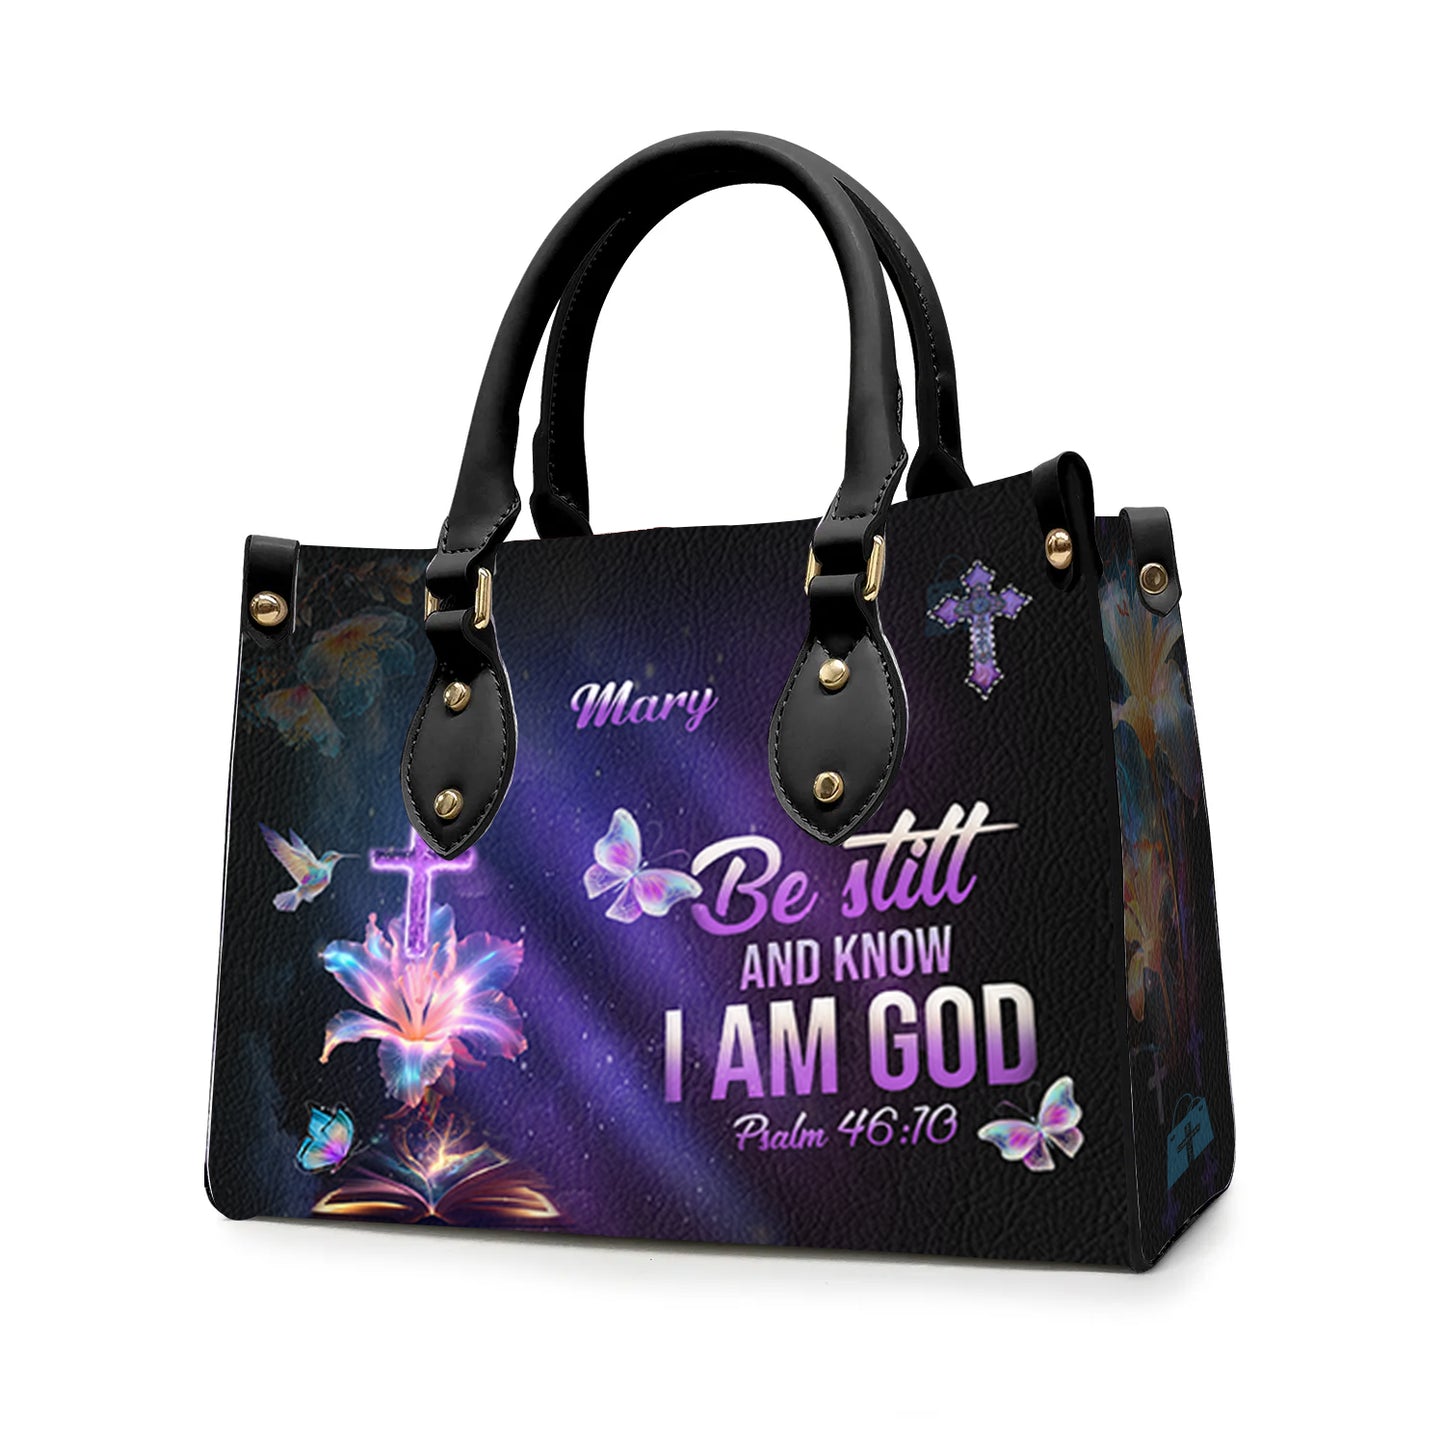 Christianartbag Handbags, Blessed Is She Leather Handbag Blue, Personalized Bags, Gifts for Women, Christmas Gift, CABLTB04290923. - Christian Art Bag